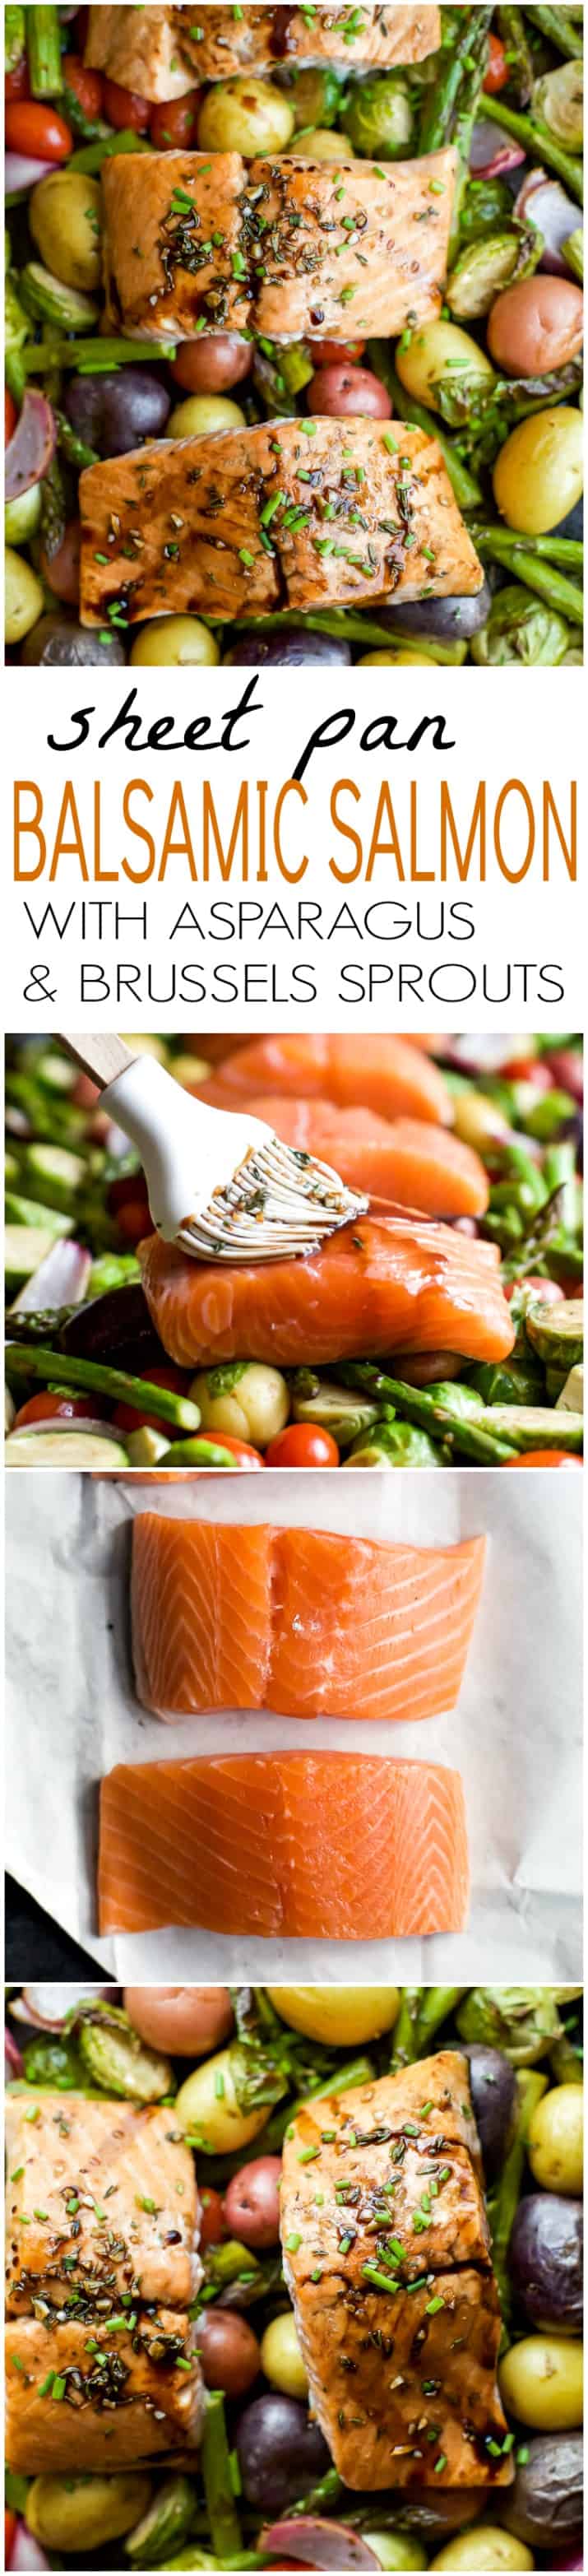 Sheet Pan Balsamic Salmon and vegetables photo collage